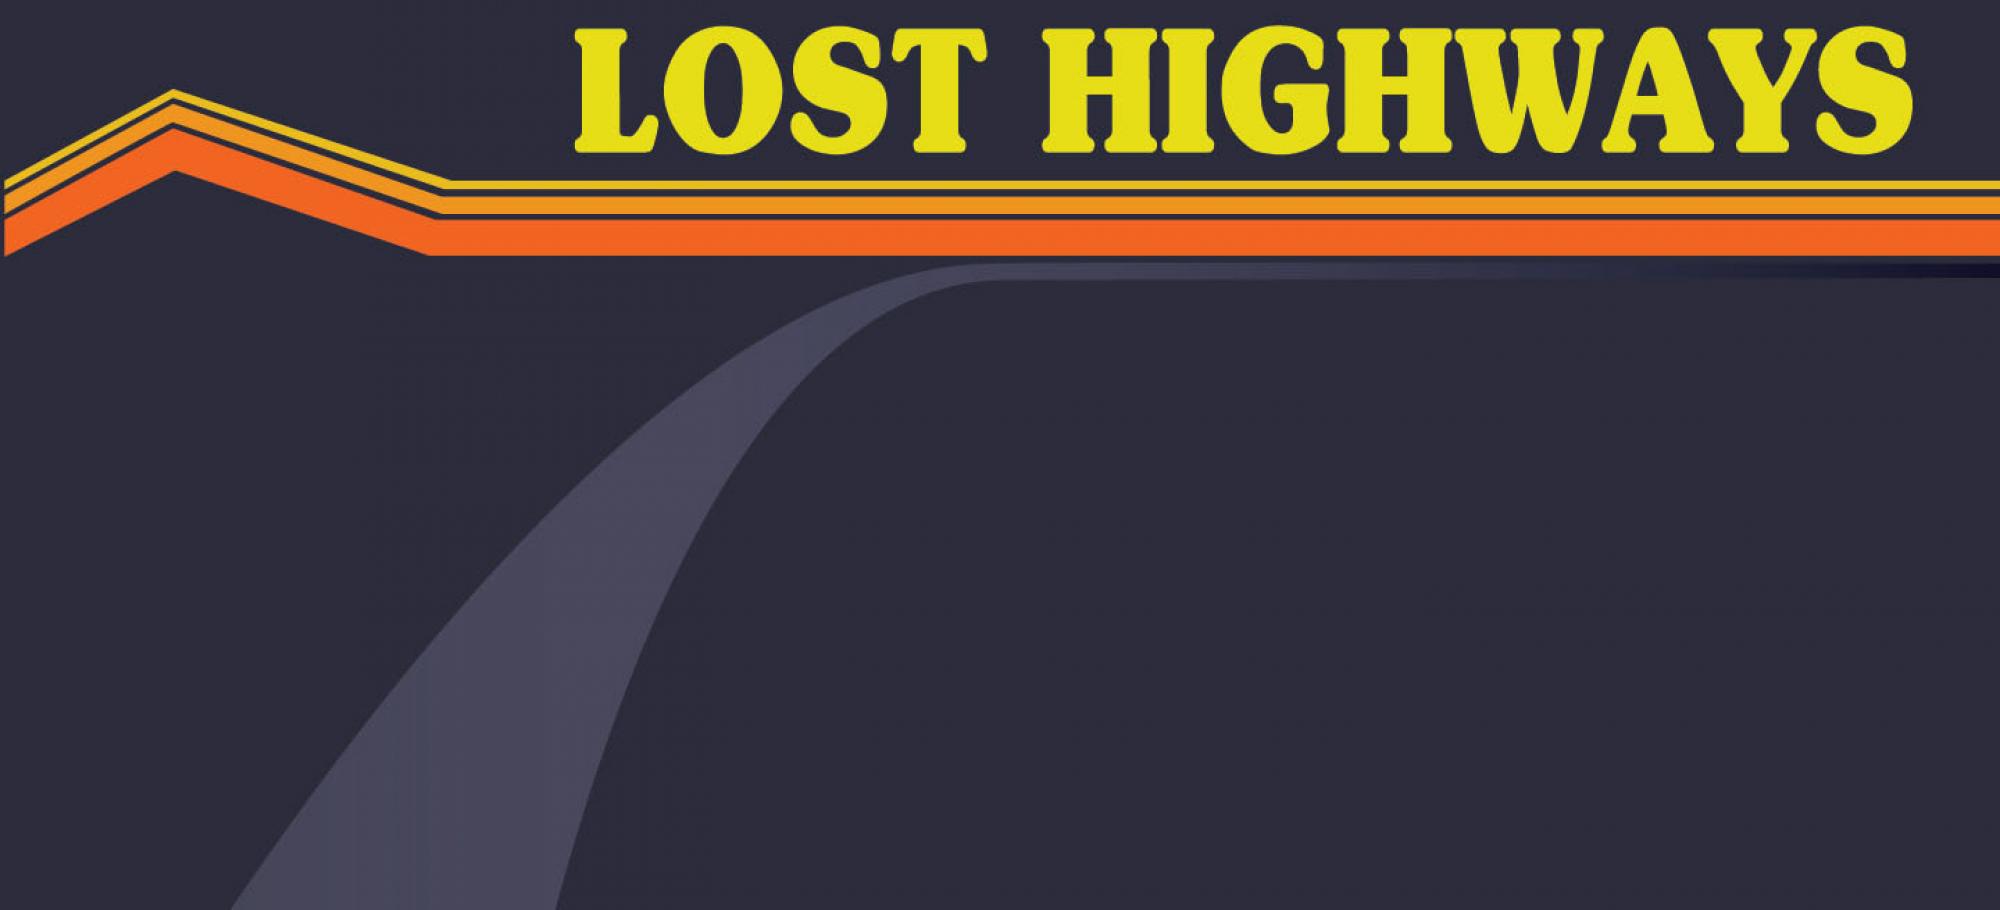 Lost highways in yellow text over dark blue background with orange stripes